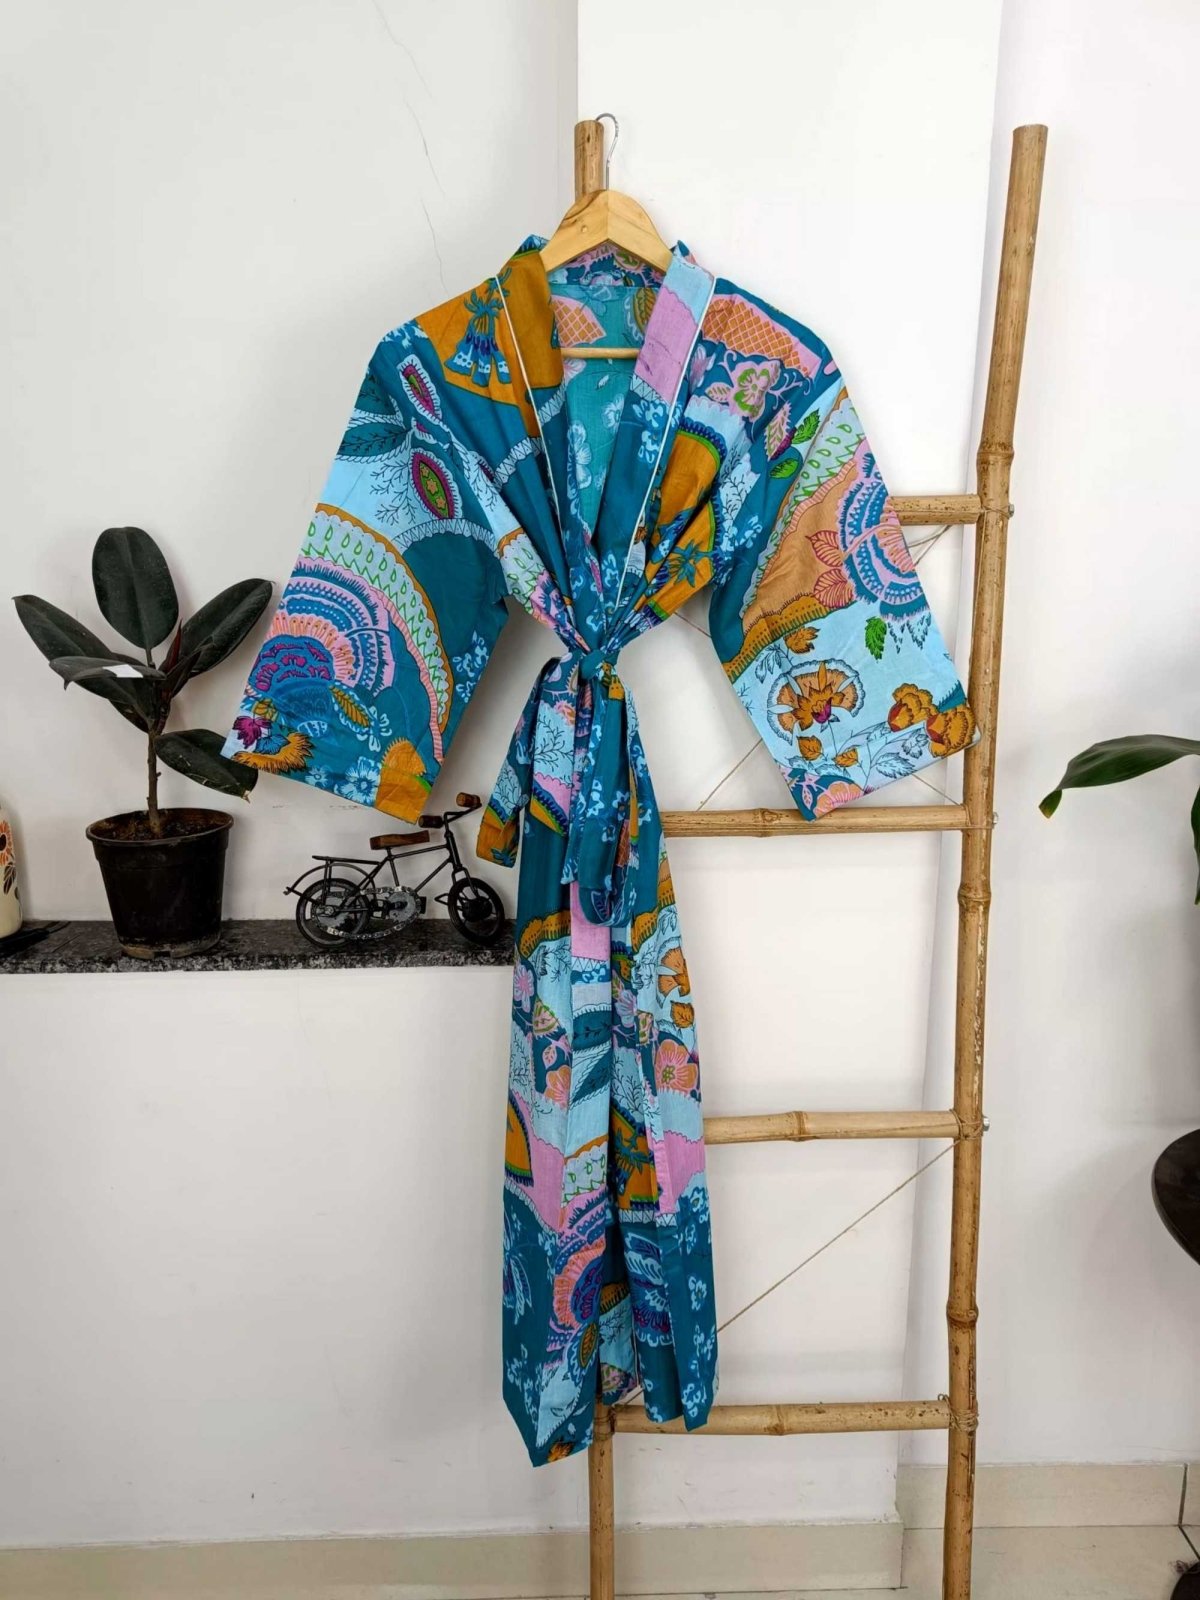 Pure Cotton Spring Summer Boho House Robe Kimono Indian Handblock Jaipur Indian Dress Turquoise Yellow Luxury Beach Holiday Wear Yacht Cover Up - The Eastern Loom